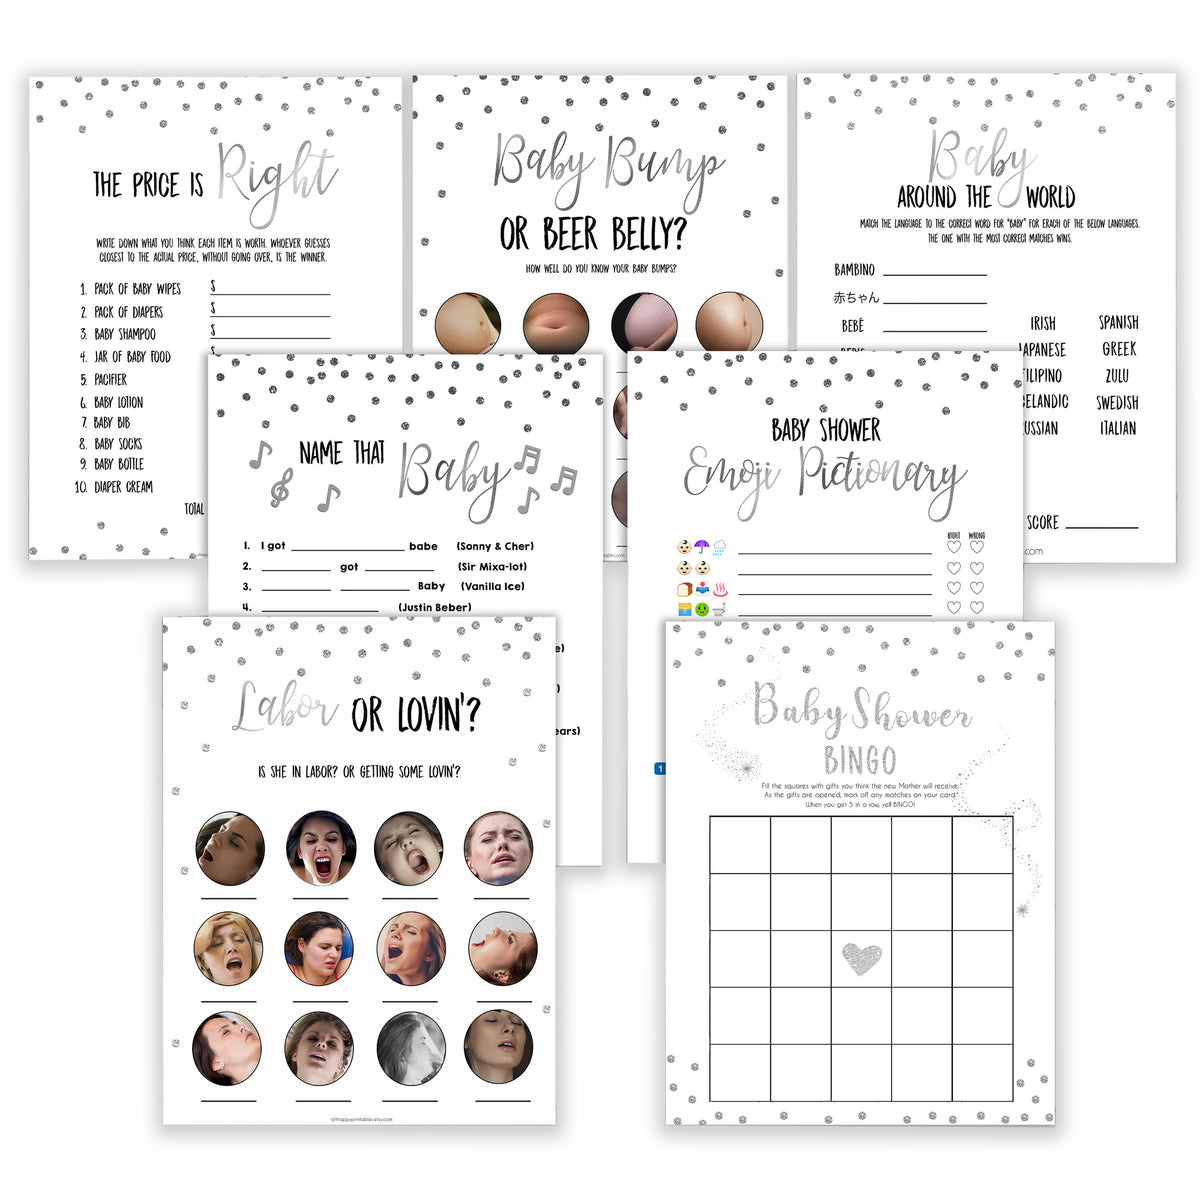 silver glitter baby shower games, printable baby shower games, silver baby games, baby shower games, fun baby shower games